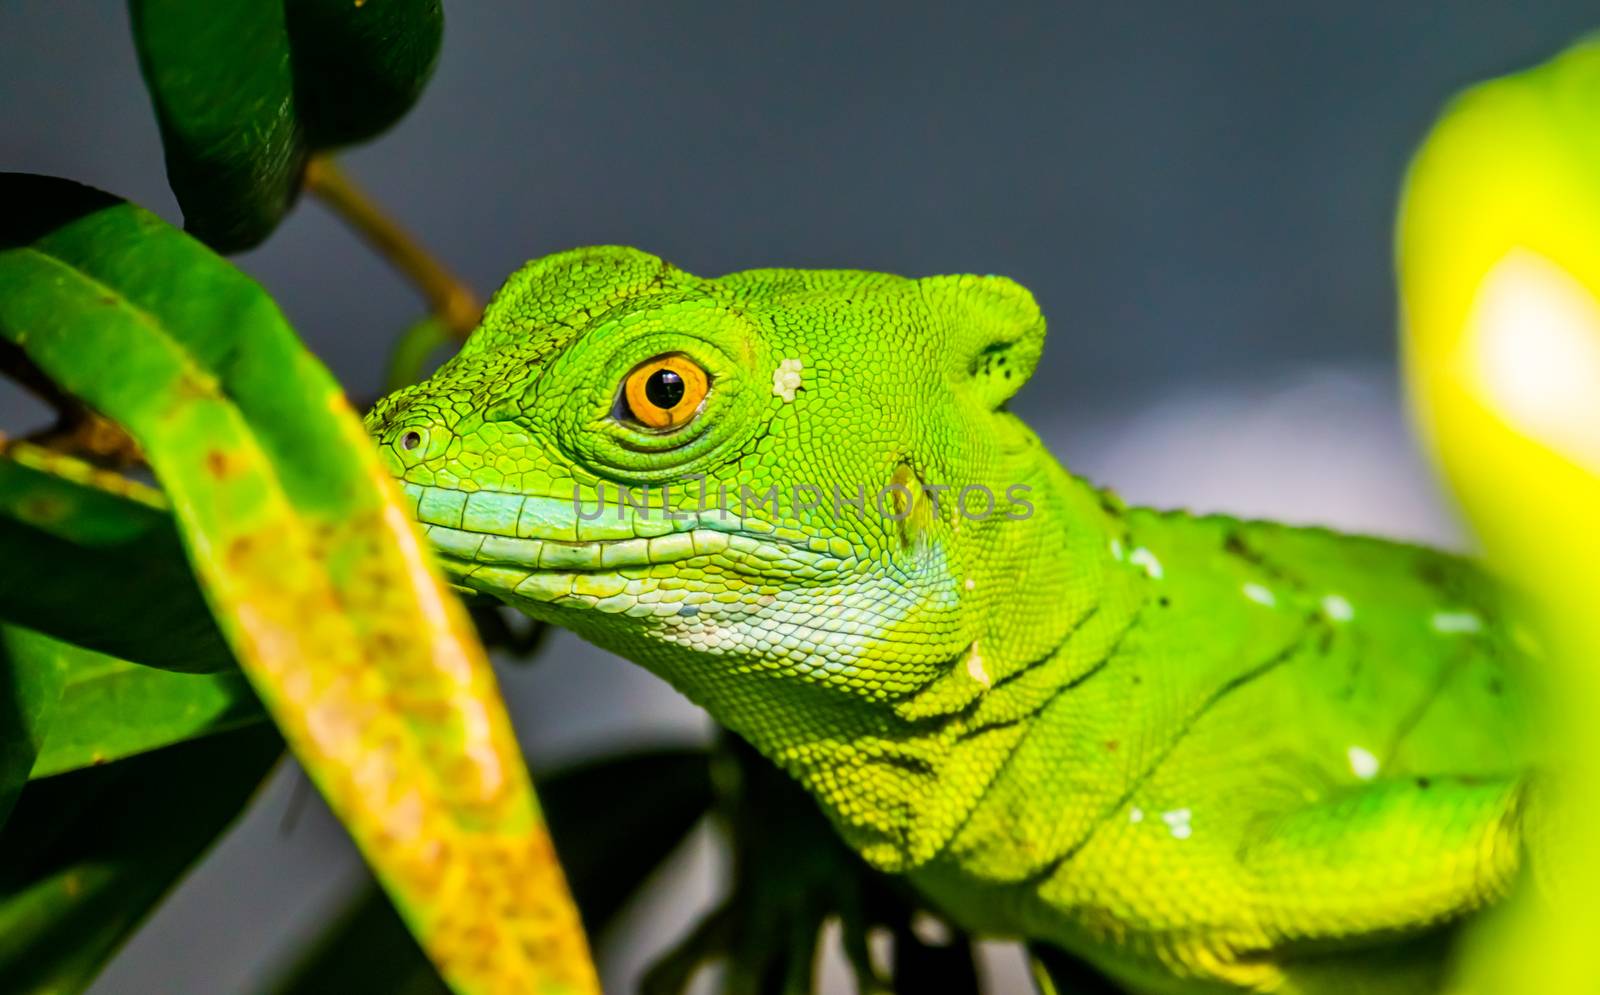 closeup of the face of a green plumed basilisk, tropical reptile specie from America